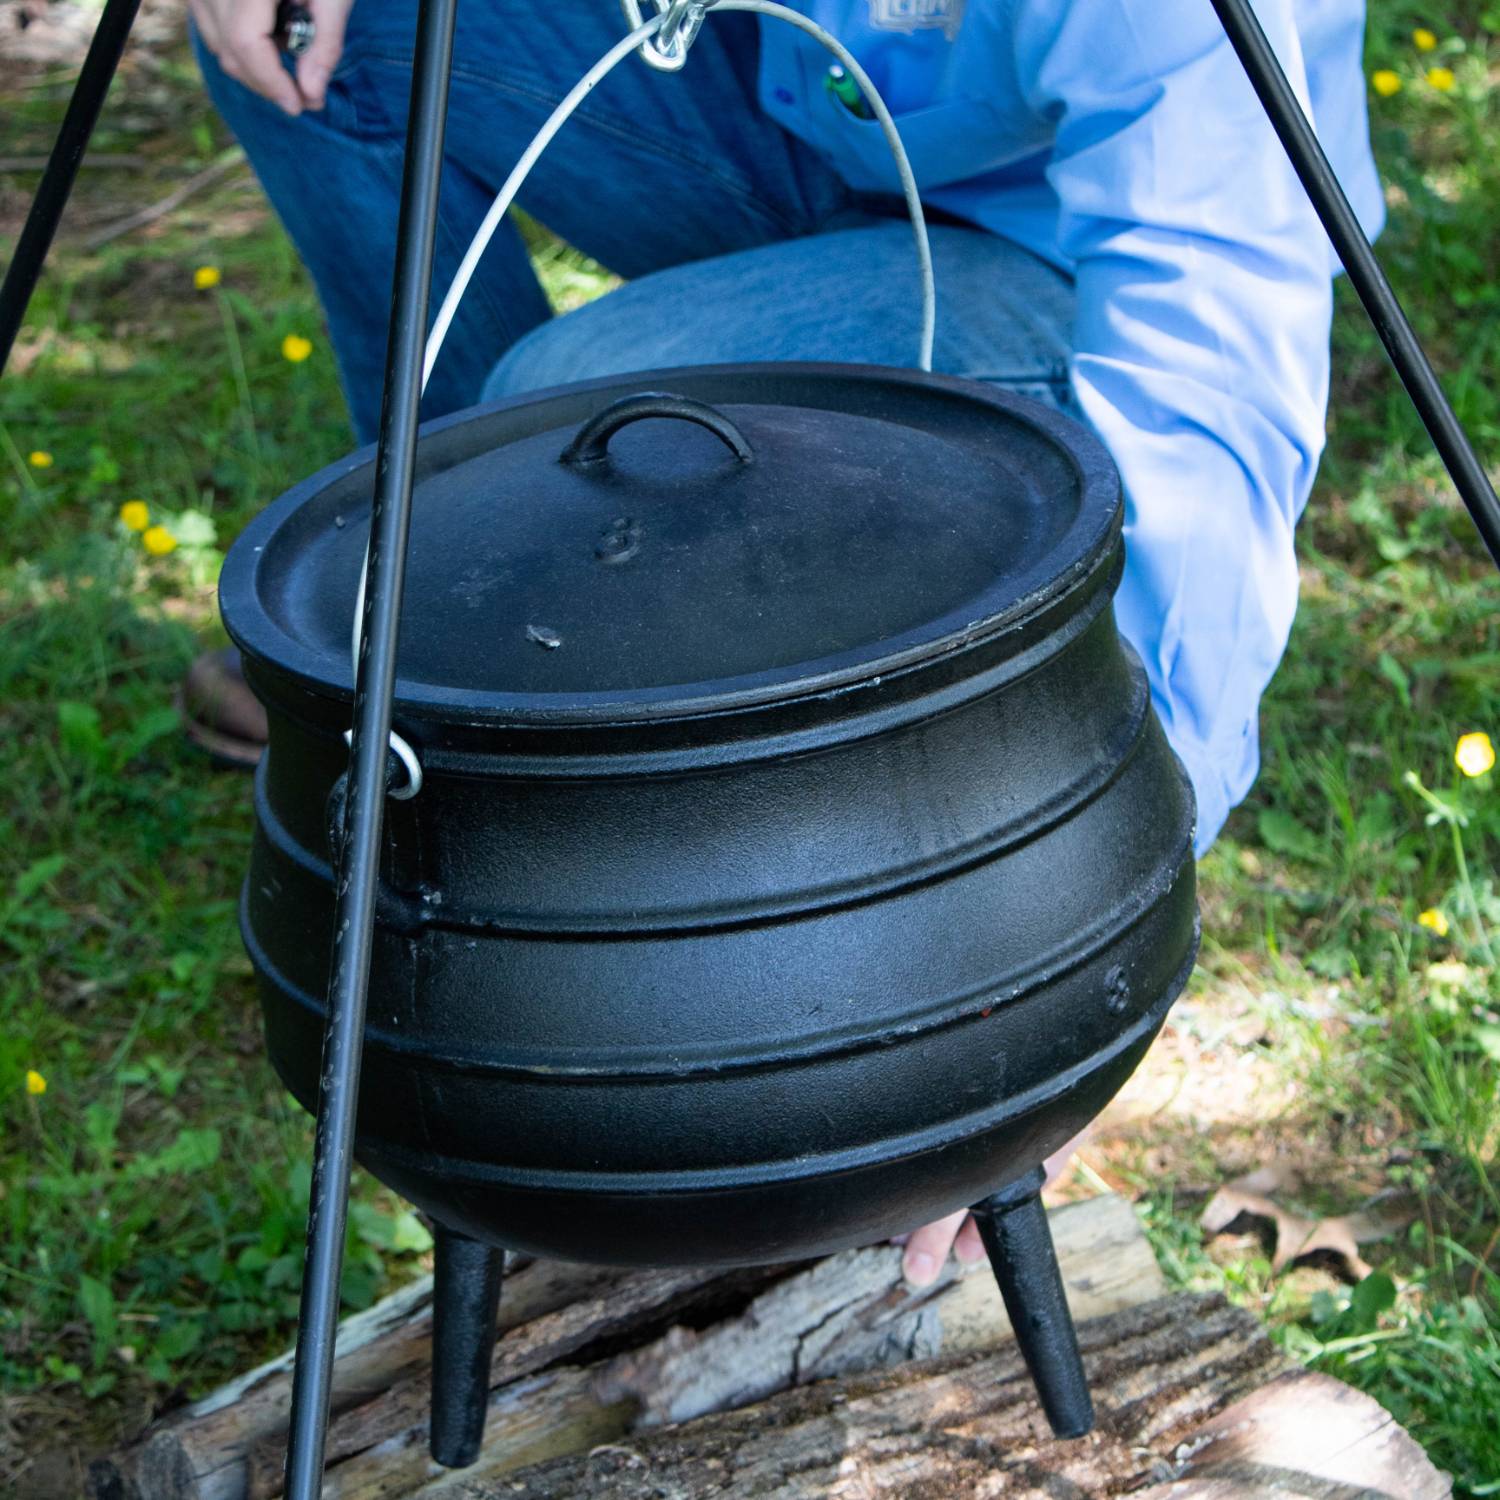 Lehman's Campfire Cooking Kettle Pot - Cast Iron Potjie with 3 Legs and Lid